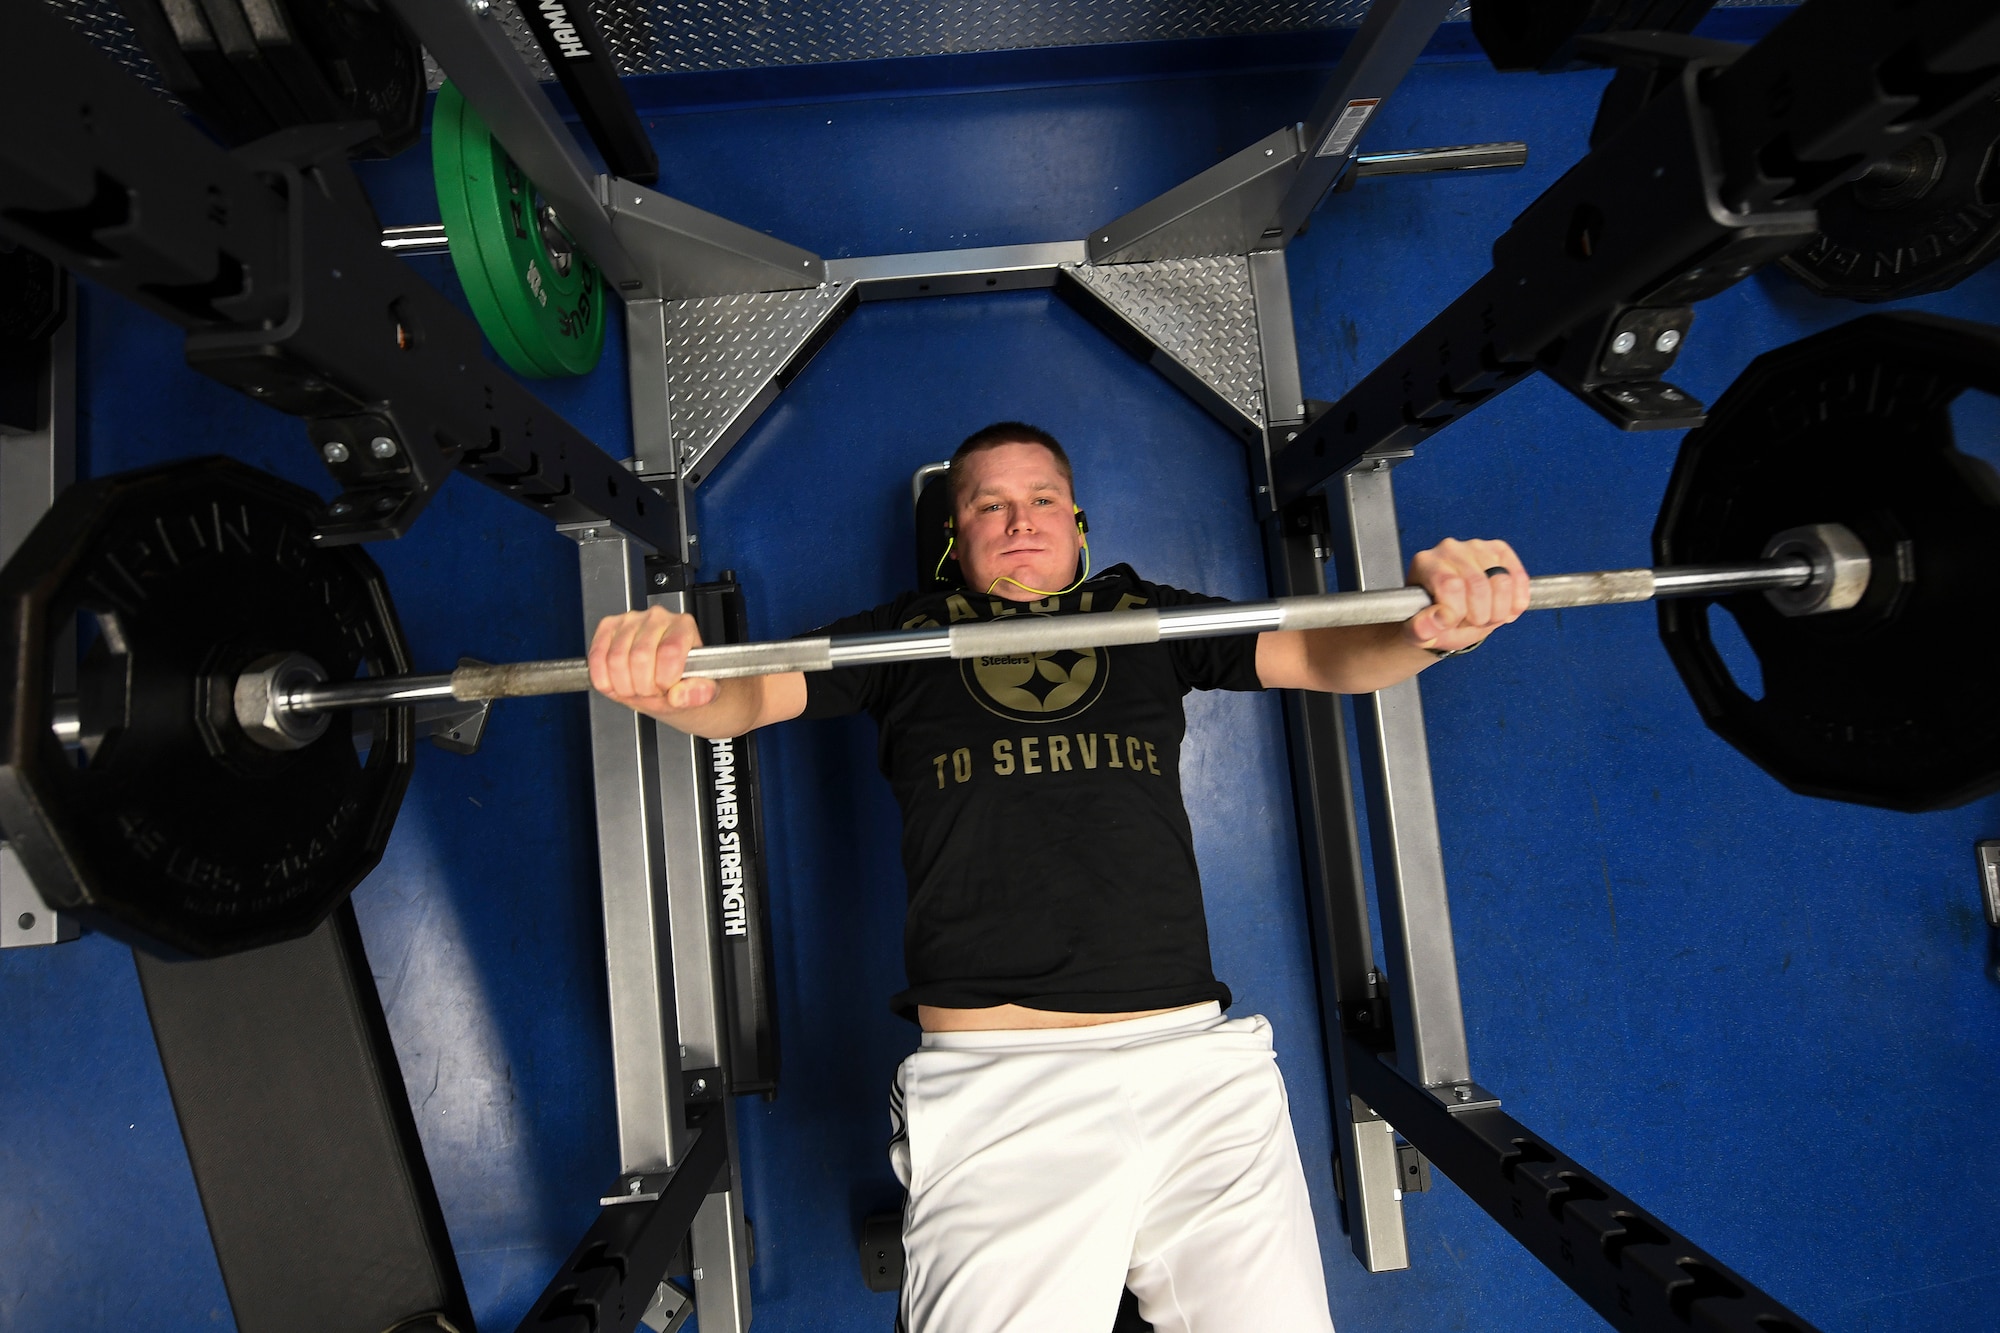 Maj. Christopher Repin, operations officer with the 2nd Infantry Brigade Combat Team, performs a declined bench press repetition at Pittsburgh IAP ARS, Pennsylvania, December 11, 2018. The 911th Airlift Wing Fitness Center replaced some of their old equipment with brand new equipment at the end of November, this includes all brand new gym equipment in the free-weight room. (U.S. Air Force photo by Joshua J. Seybert)